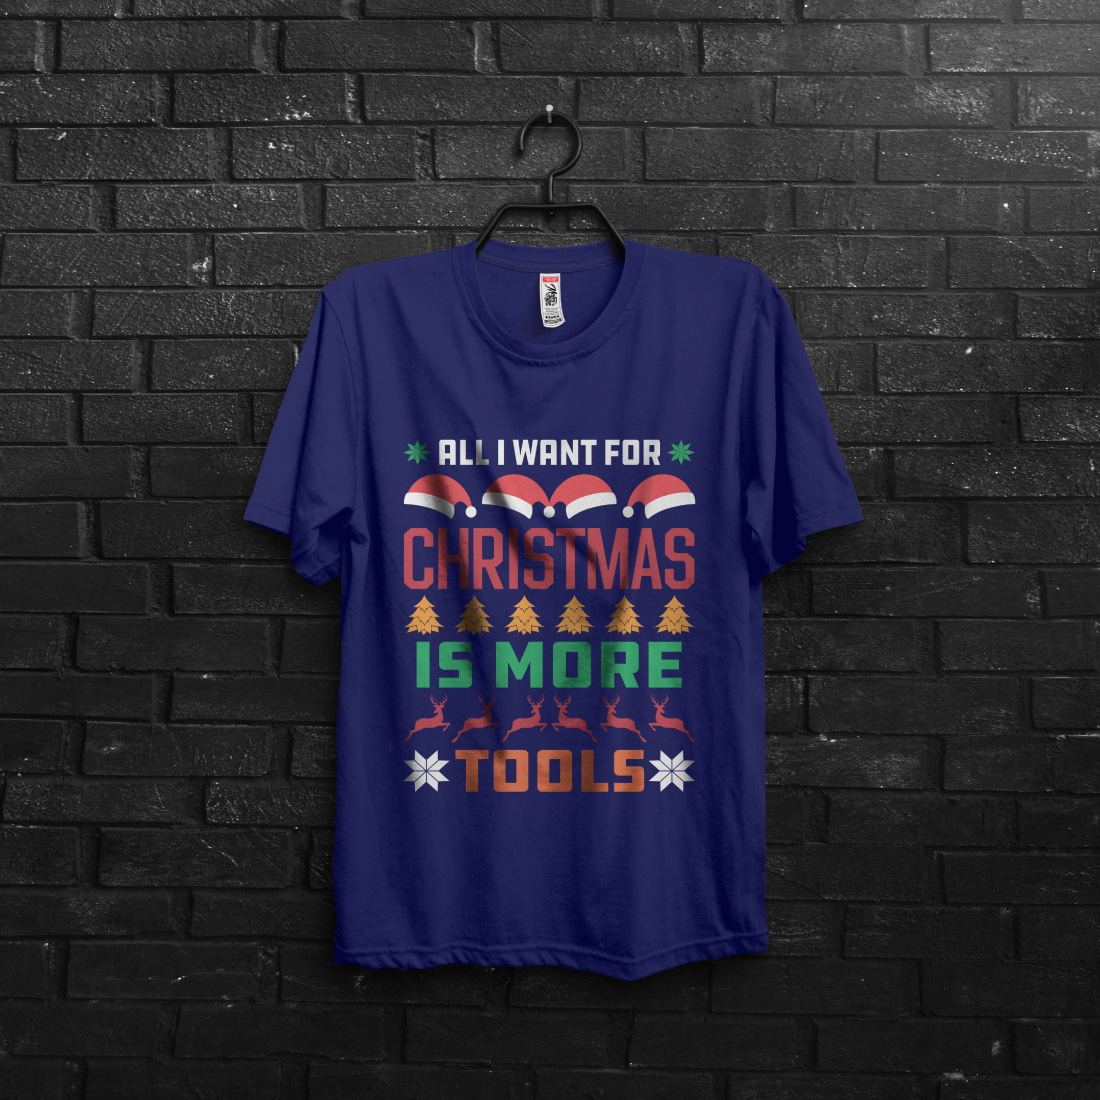 All I want for Christmas is more tools t-shirt design preview image.